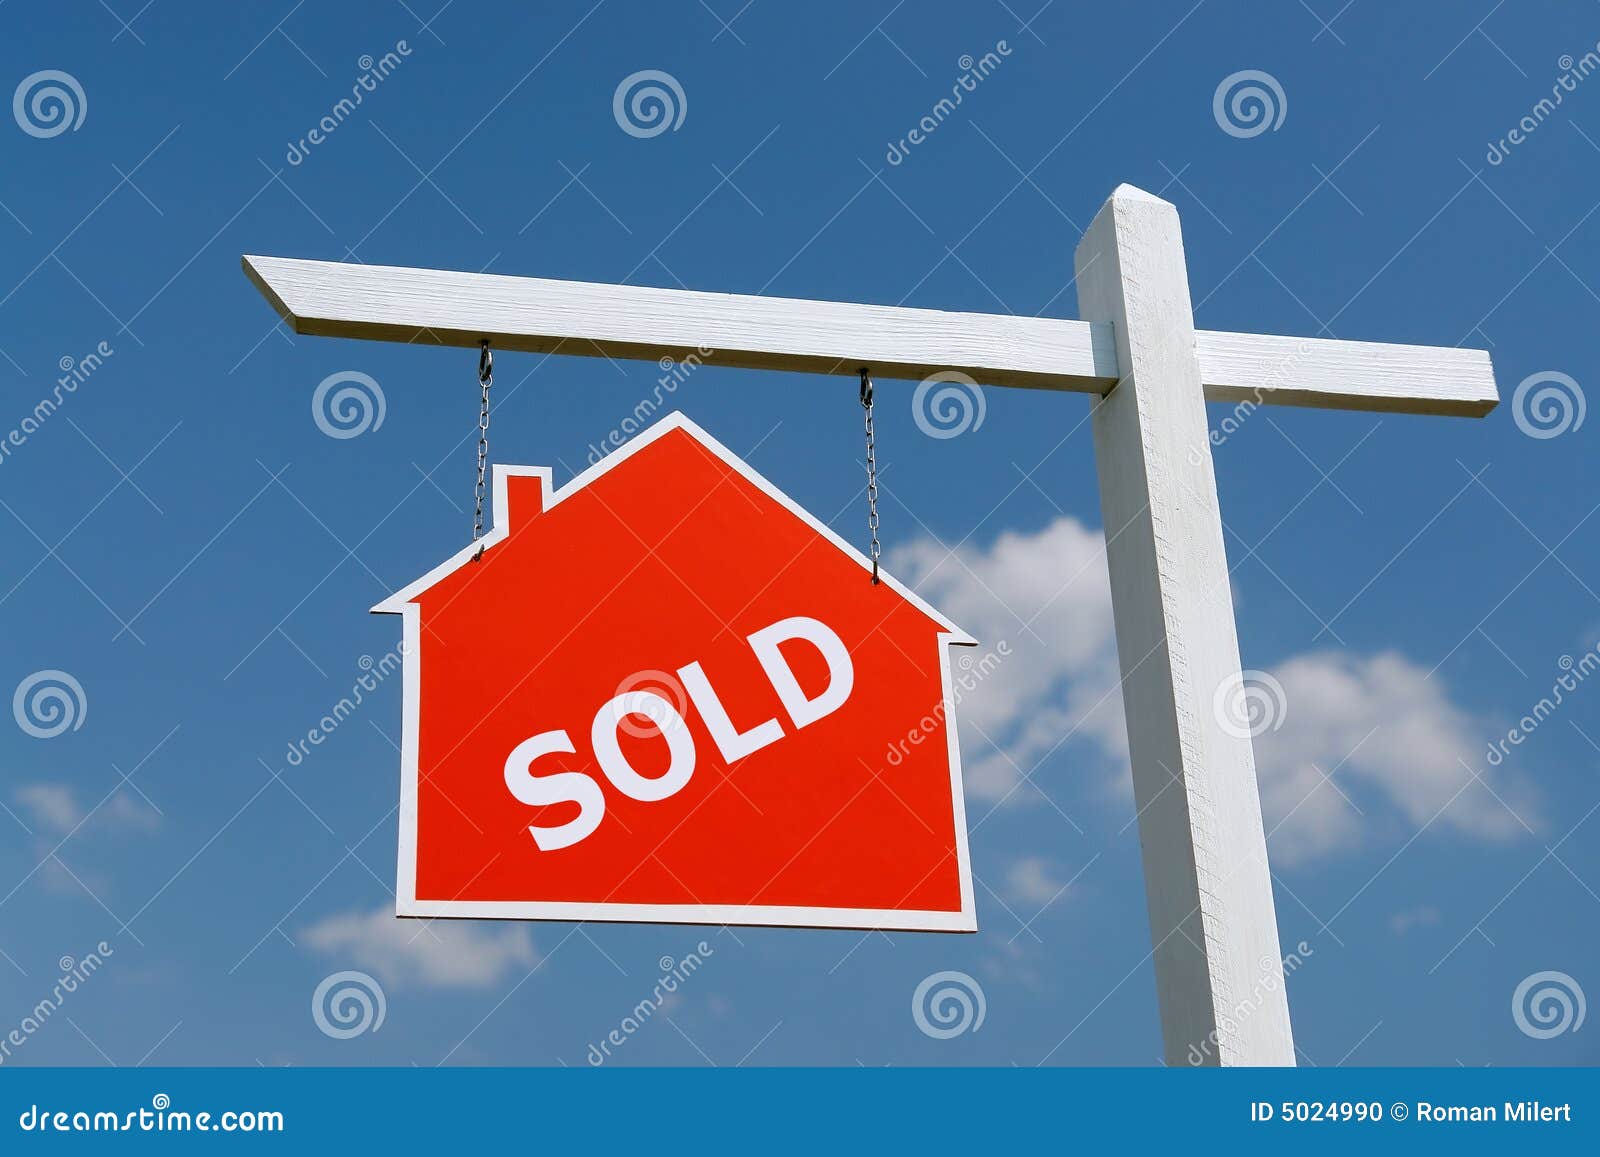 house sold signpost